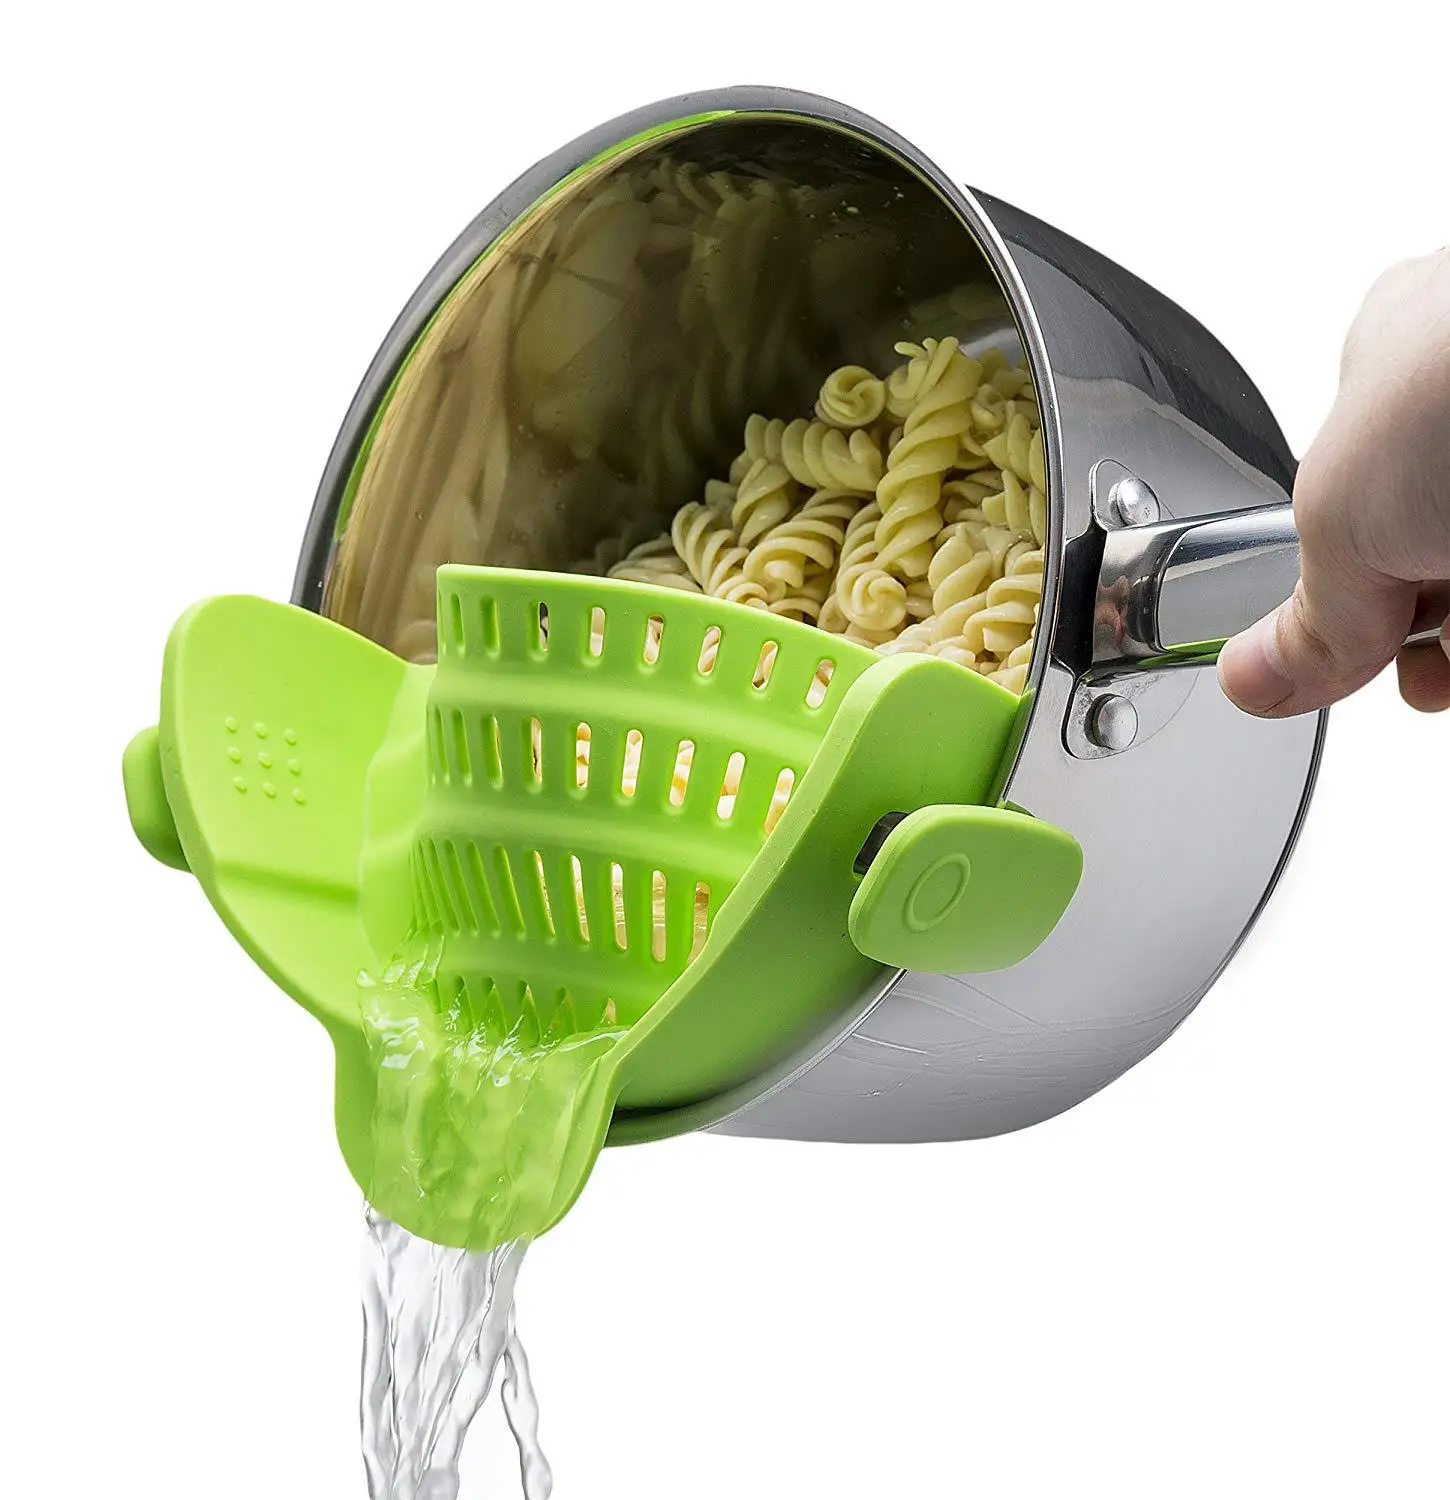 

Heat Resistant Snap And Strain Strainer Fits all Pots and Bowls Silicone Colander Clip On Food Strainer For Pots Pans